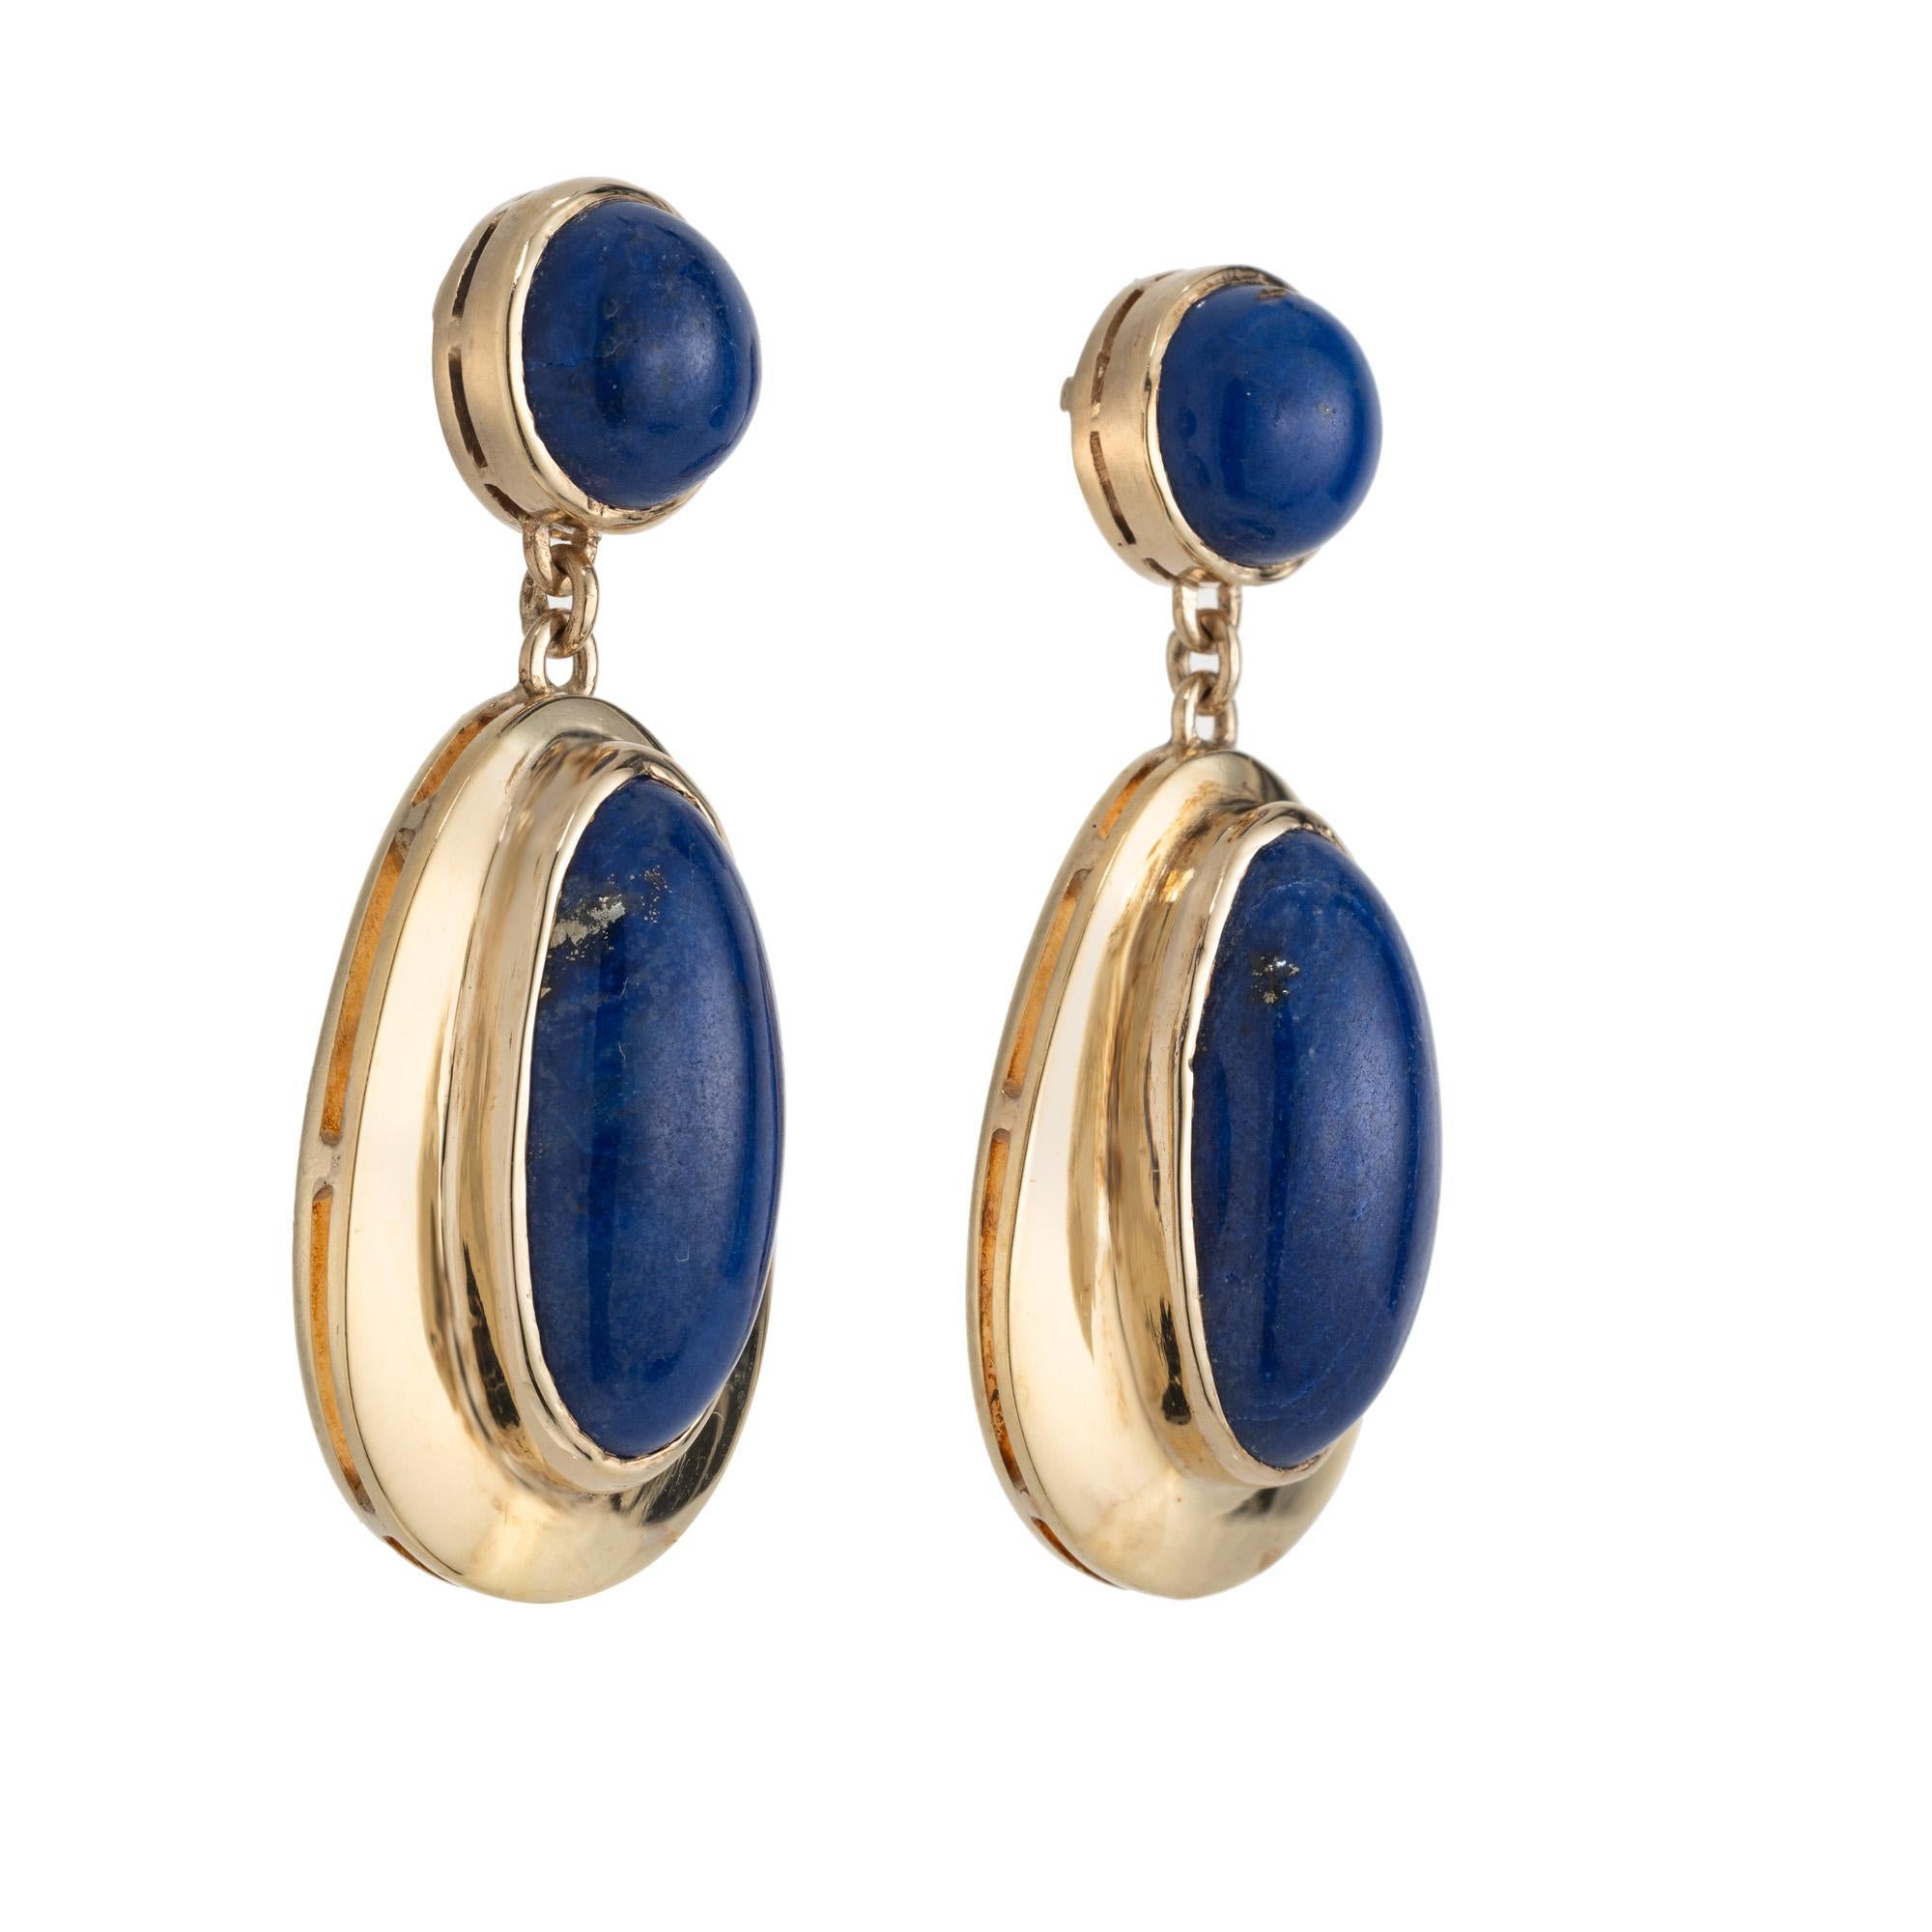 1960's Mid-Century oval round blue cabochon Lapis yellow gold dangle earrings are the perfect blend of elegance and modern style. 2 oval cabochon bezel Lapis that are mounted in 14k yellow gold settings. They are both accented by a round cabochon